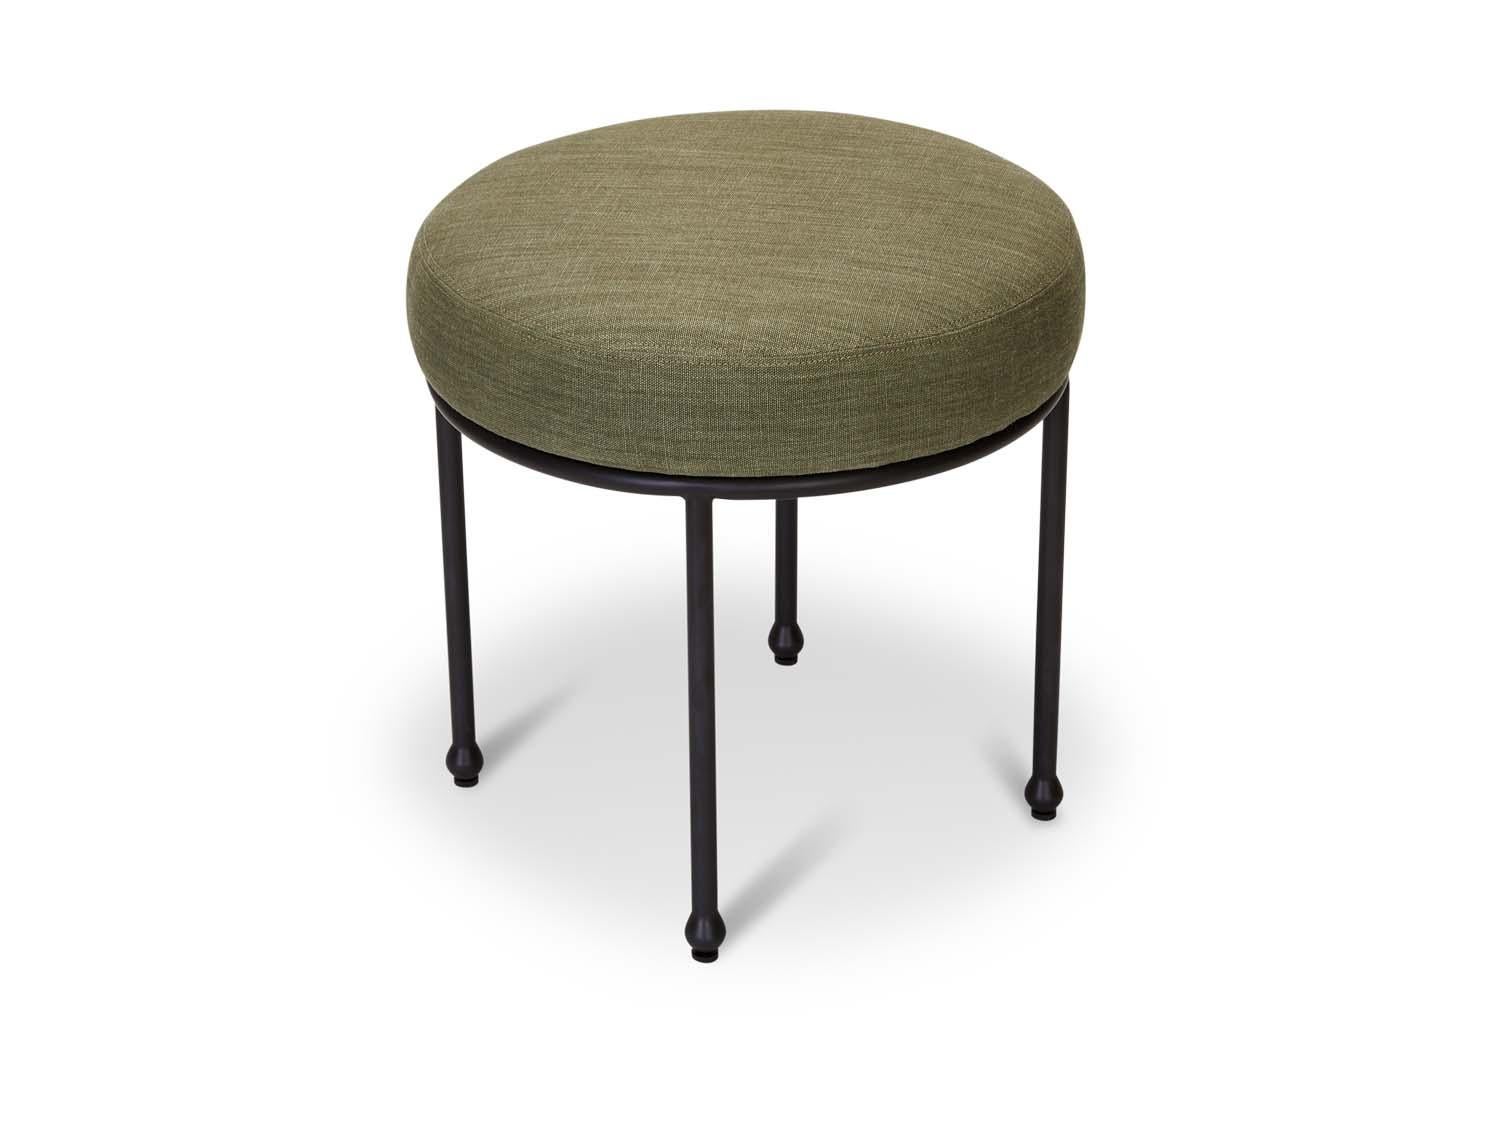 The Petite Orsini Ottoman features a minimal metal base with decorative ball feet and an upholstered seat. 

The Lawson-Fenning Collection is designed and handmade in Los Angeles, California. Reach out to discover what options are currently in